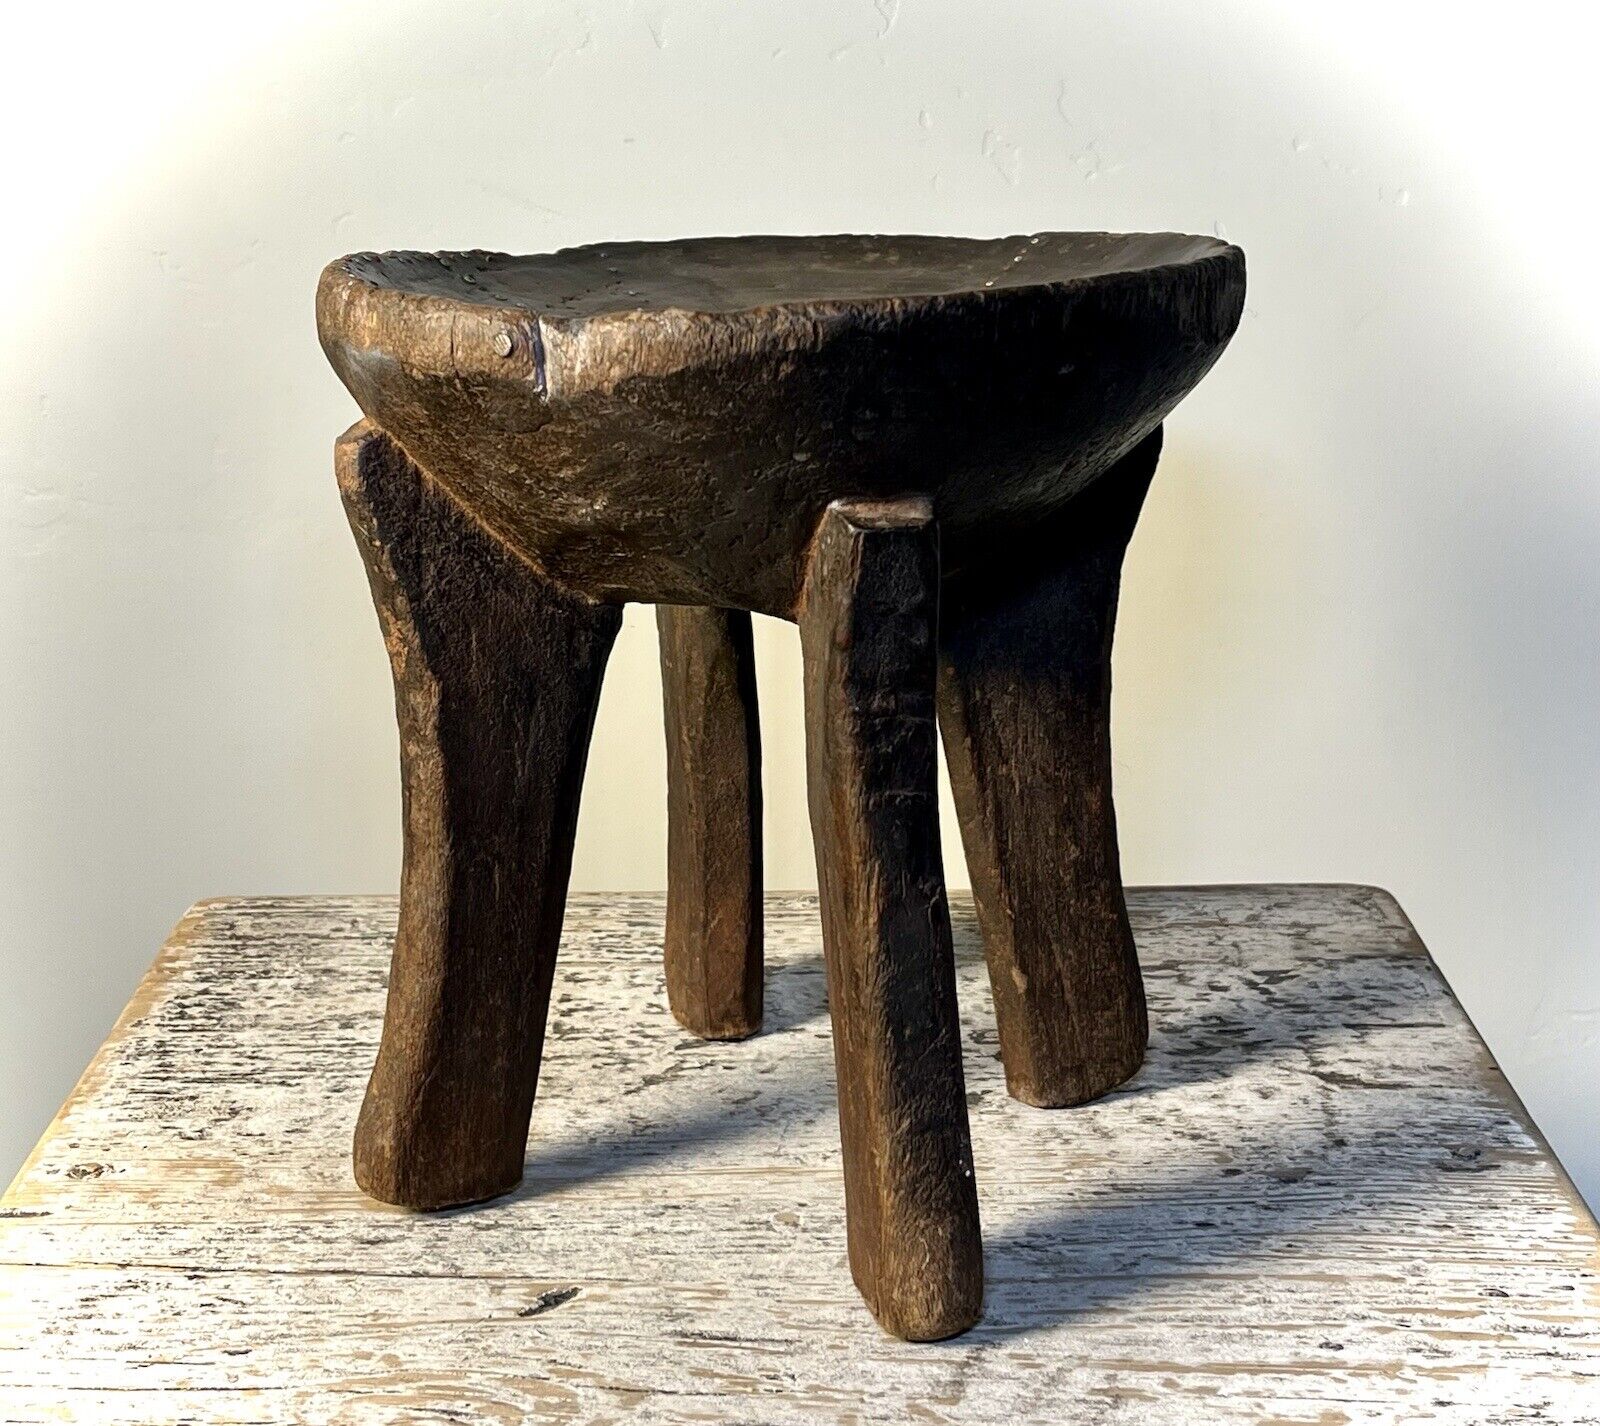 Vintage Senufo Stool. Hand Carved with Embedded Beads. 9” tall. Burkina Faso.